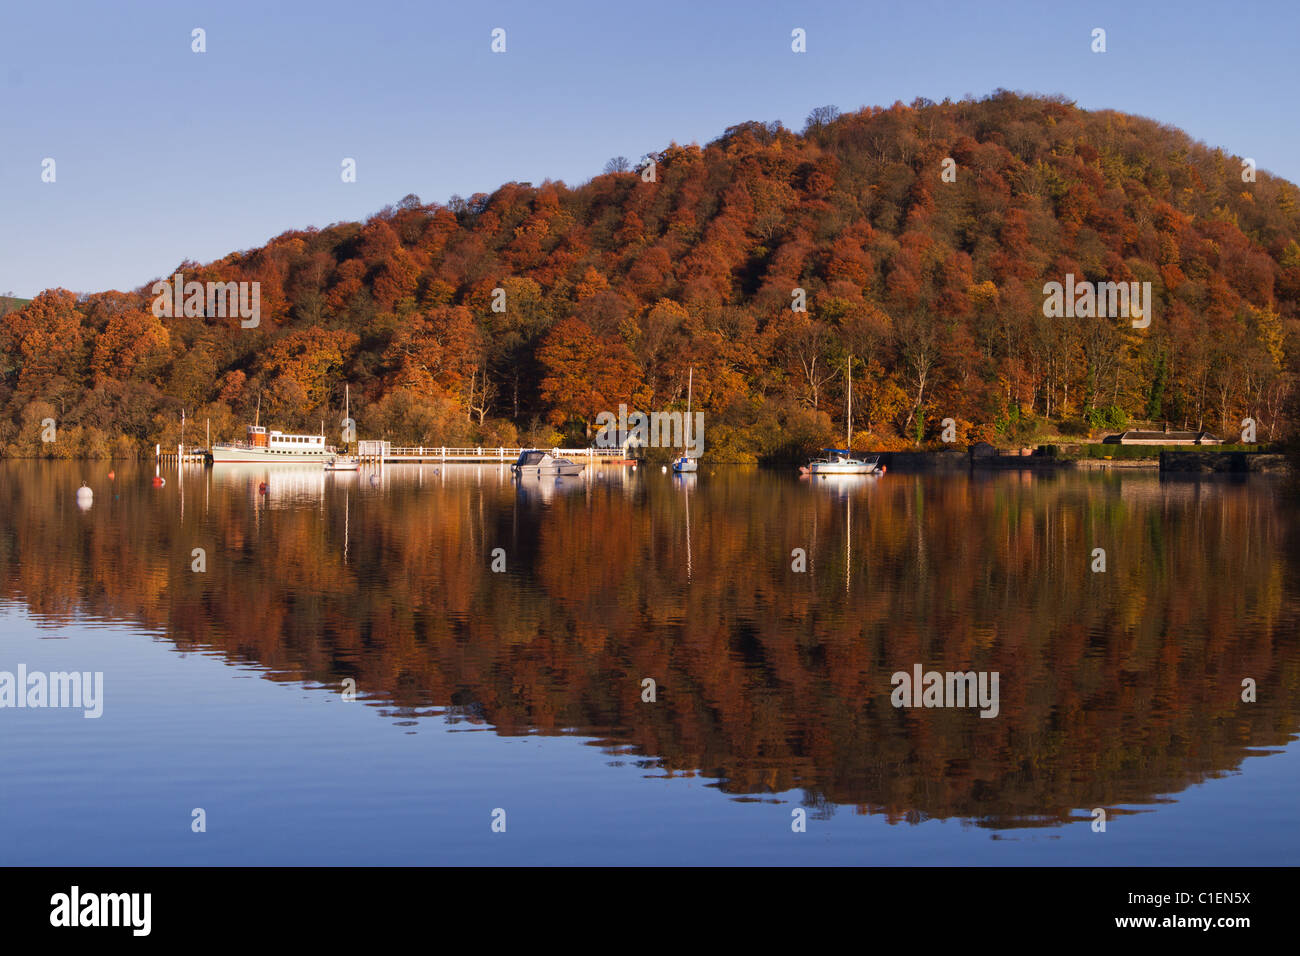 Boats, pier and autumn trees reflected in lake water. Ullswater, Lake District, England. Stock Photo